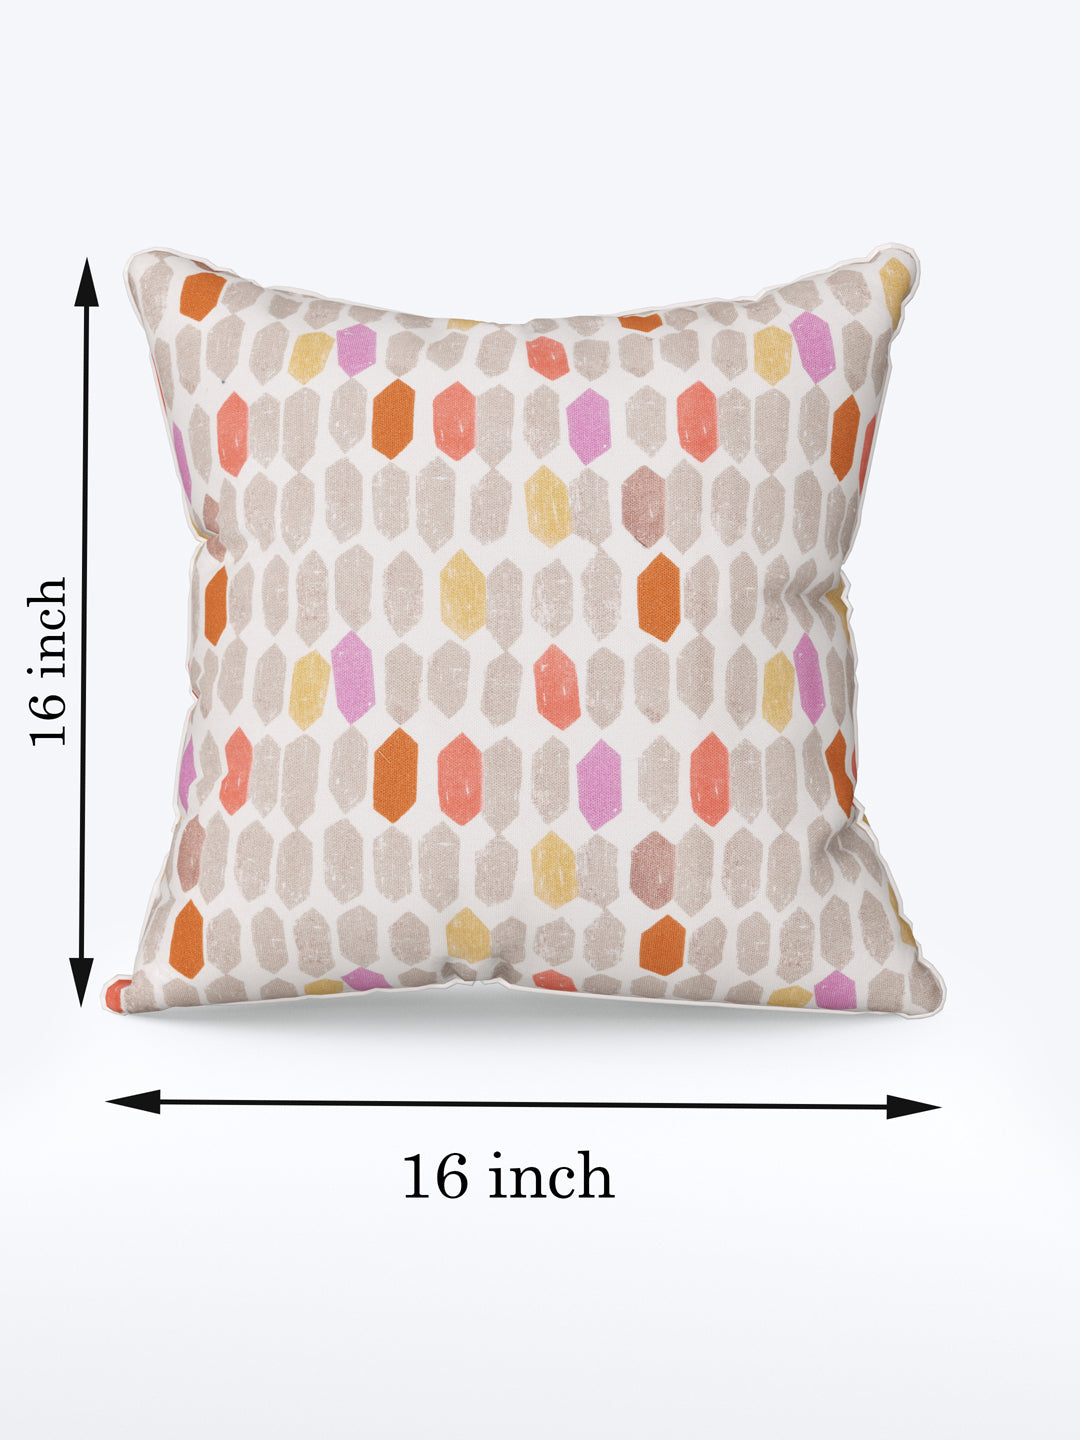 Cushion Cover Set Of 5; Multicolor Hexagons